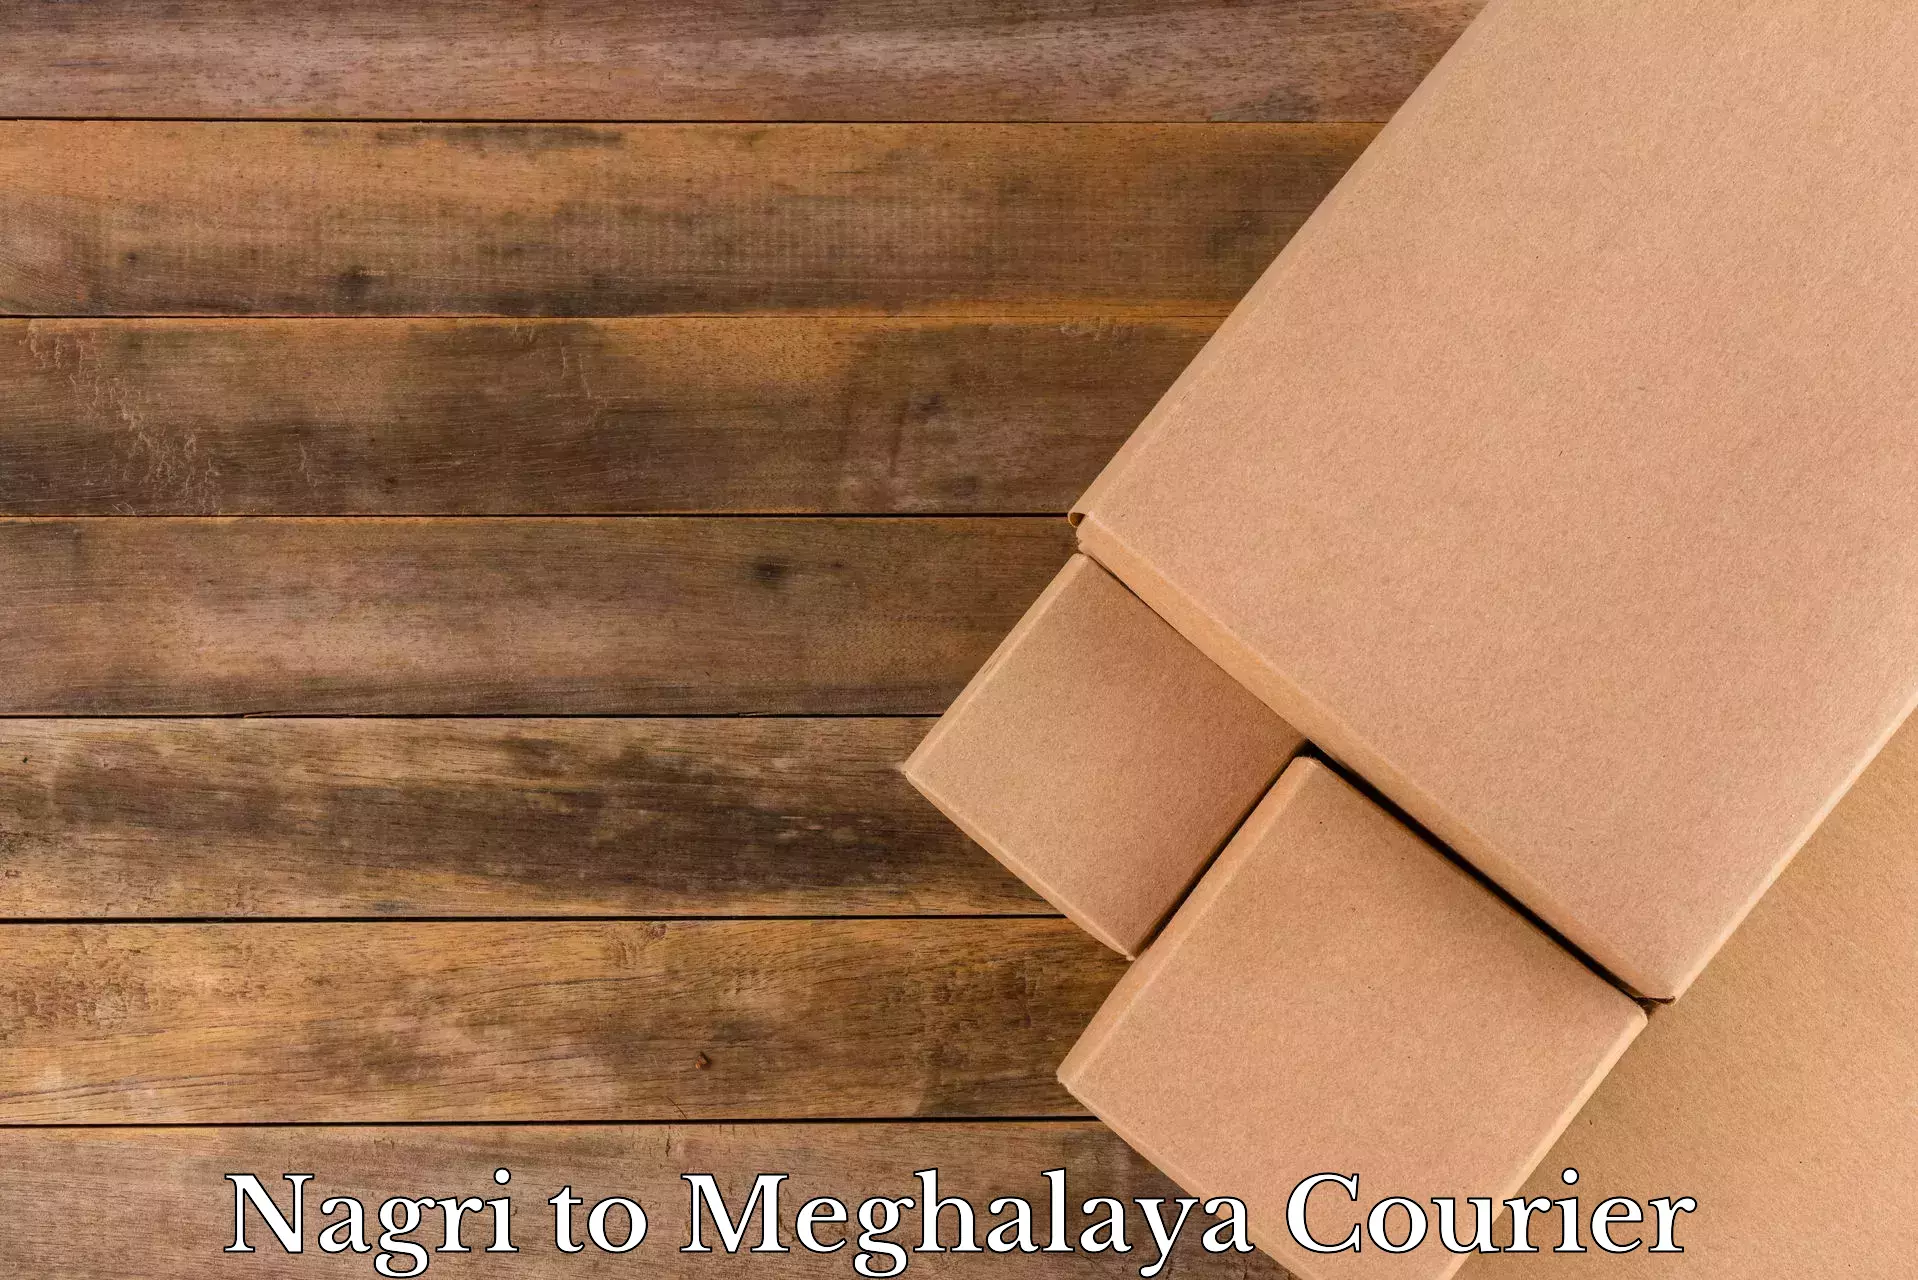 Expert goods movers in Nagri to Meghalaya